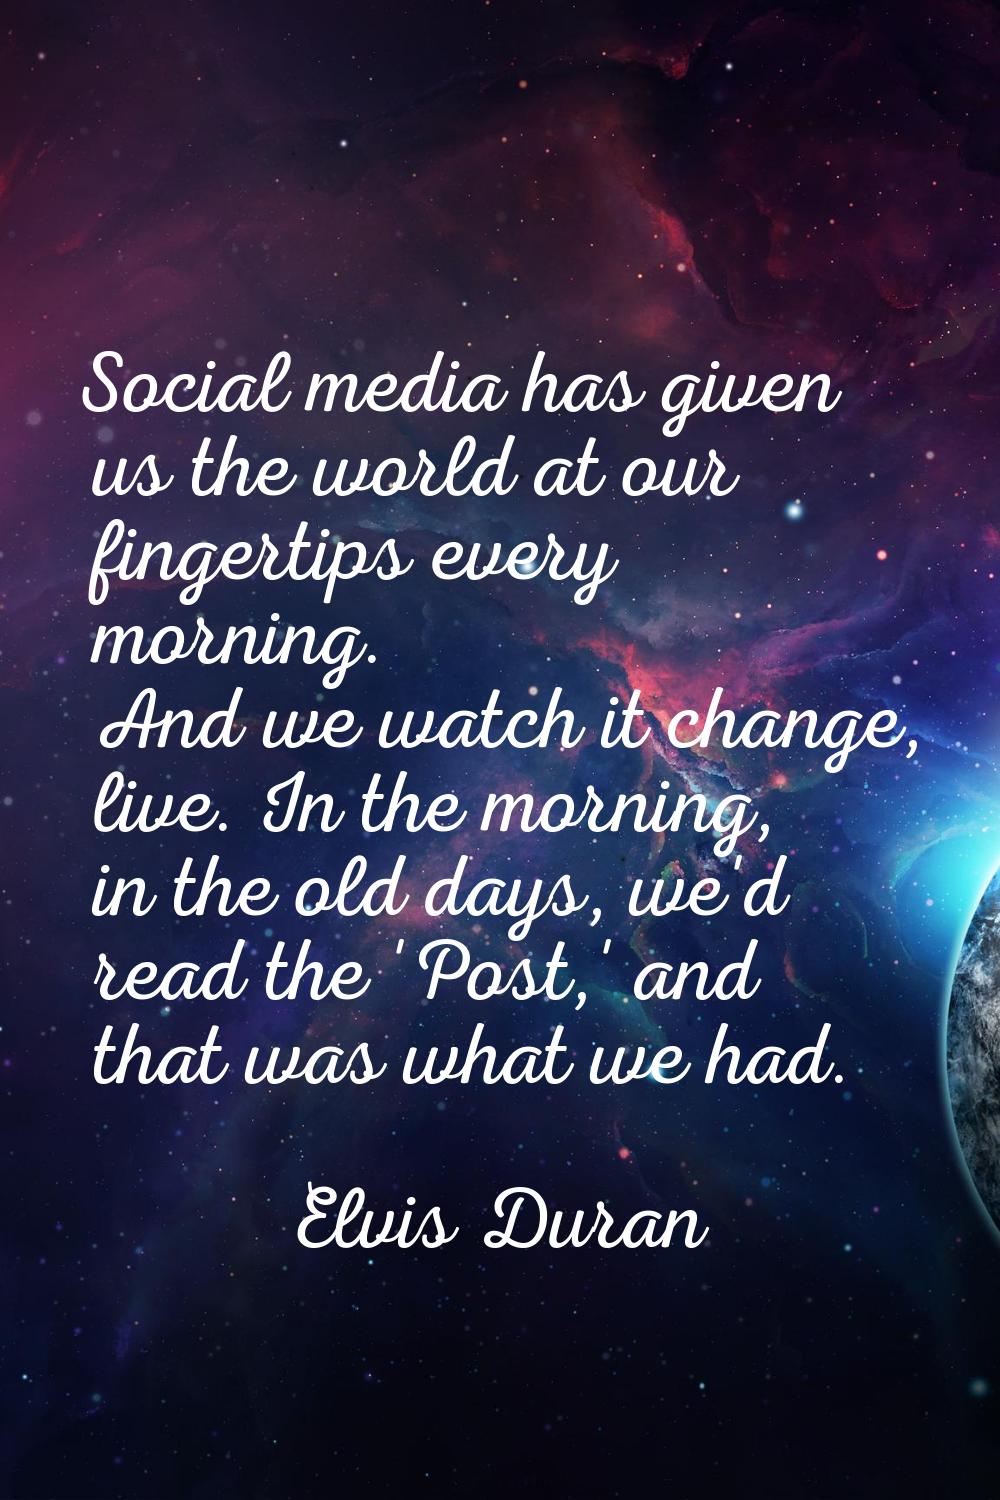 Social media has given us the world at our fingertips every morning. And we watch it change, live. 